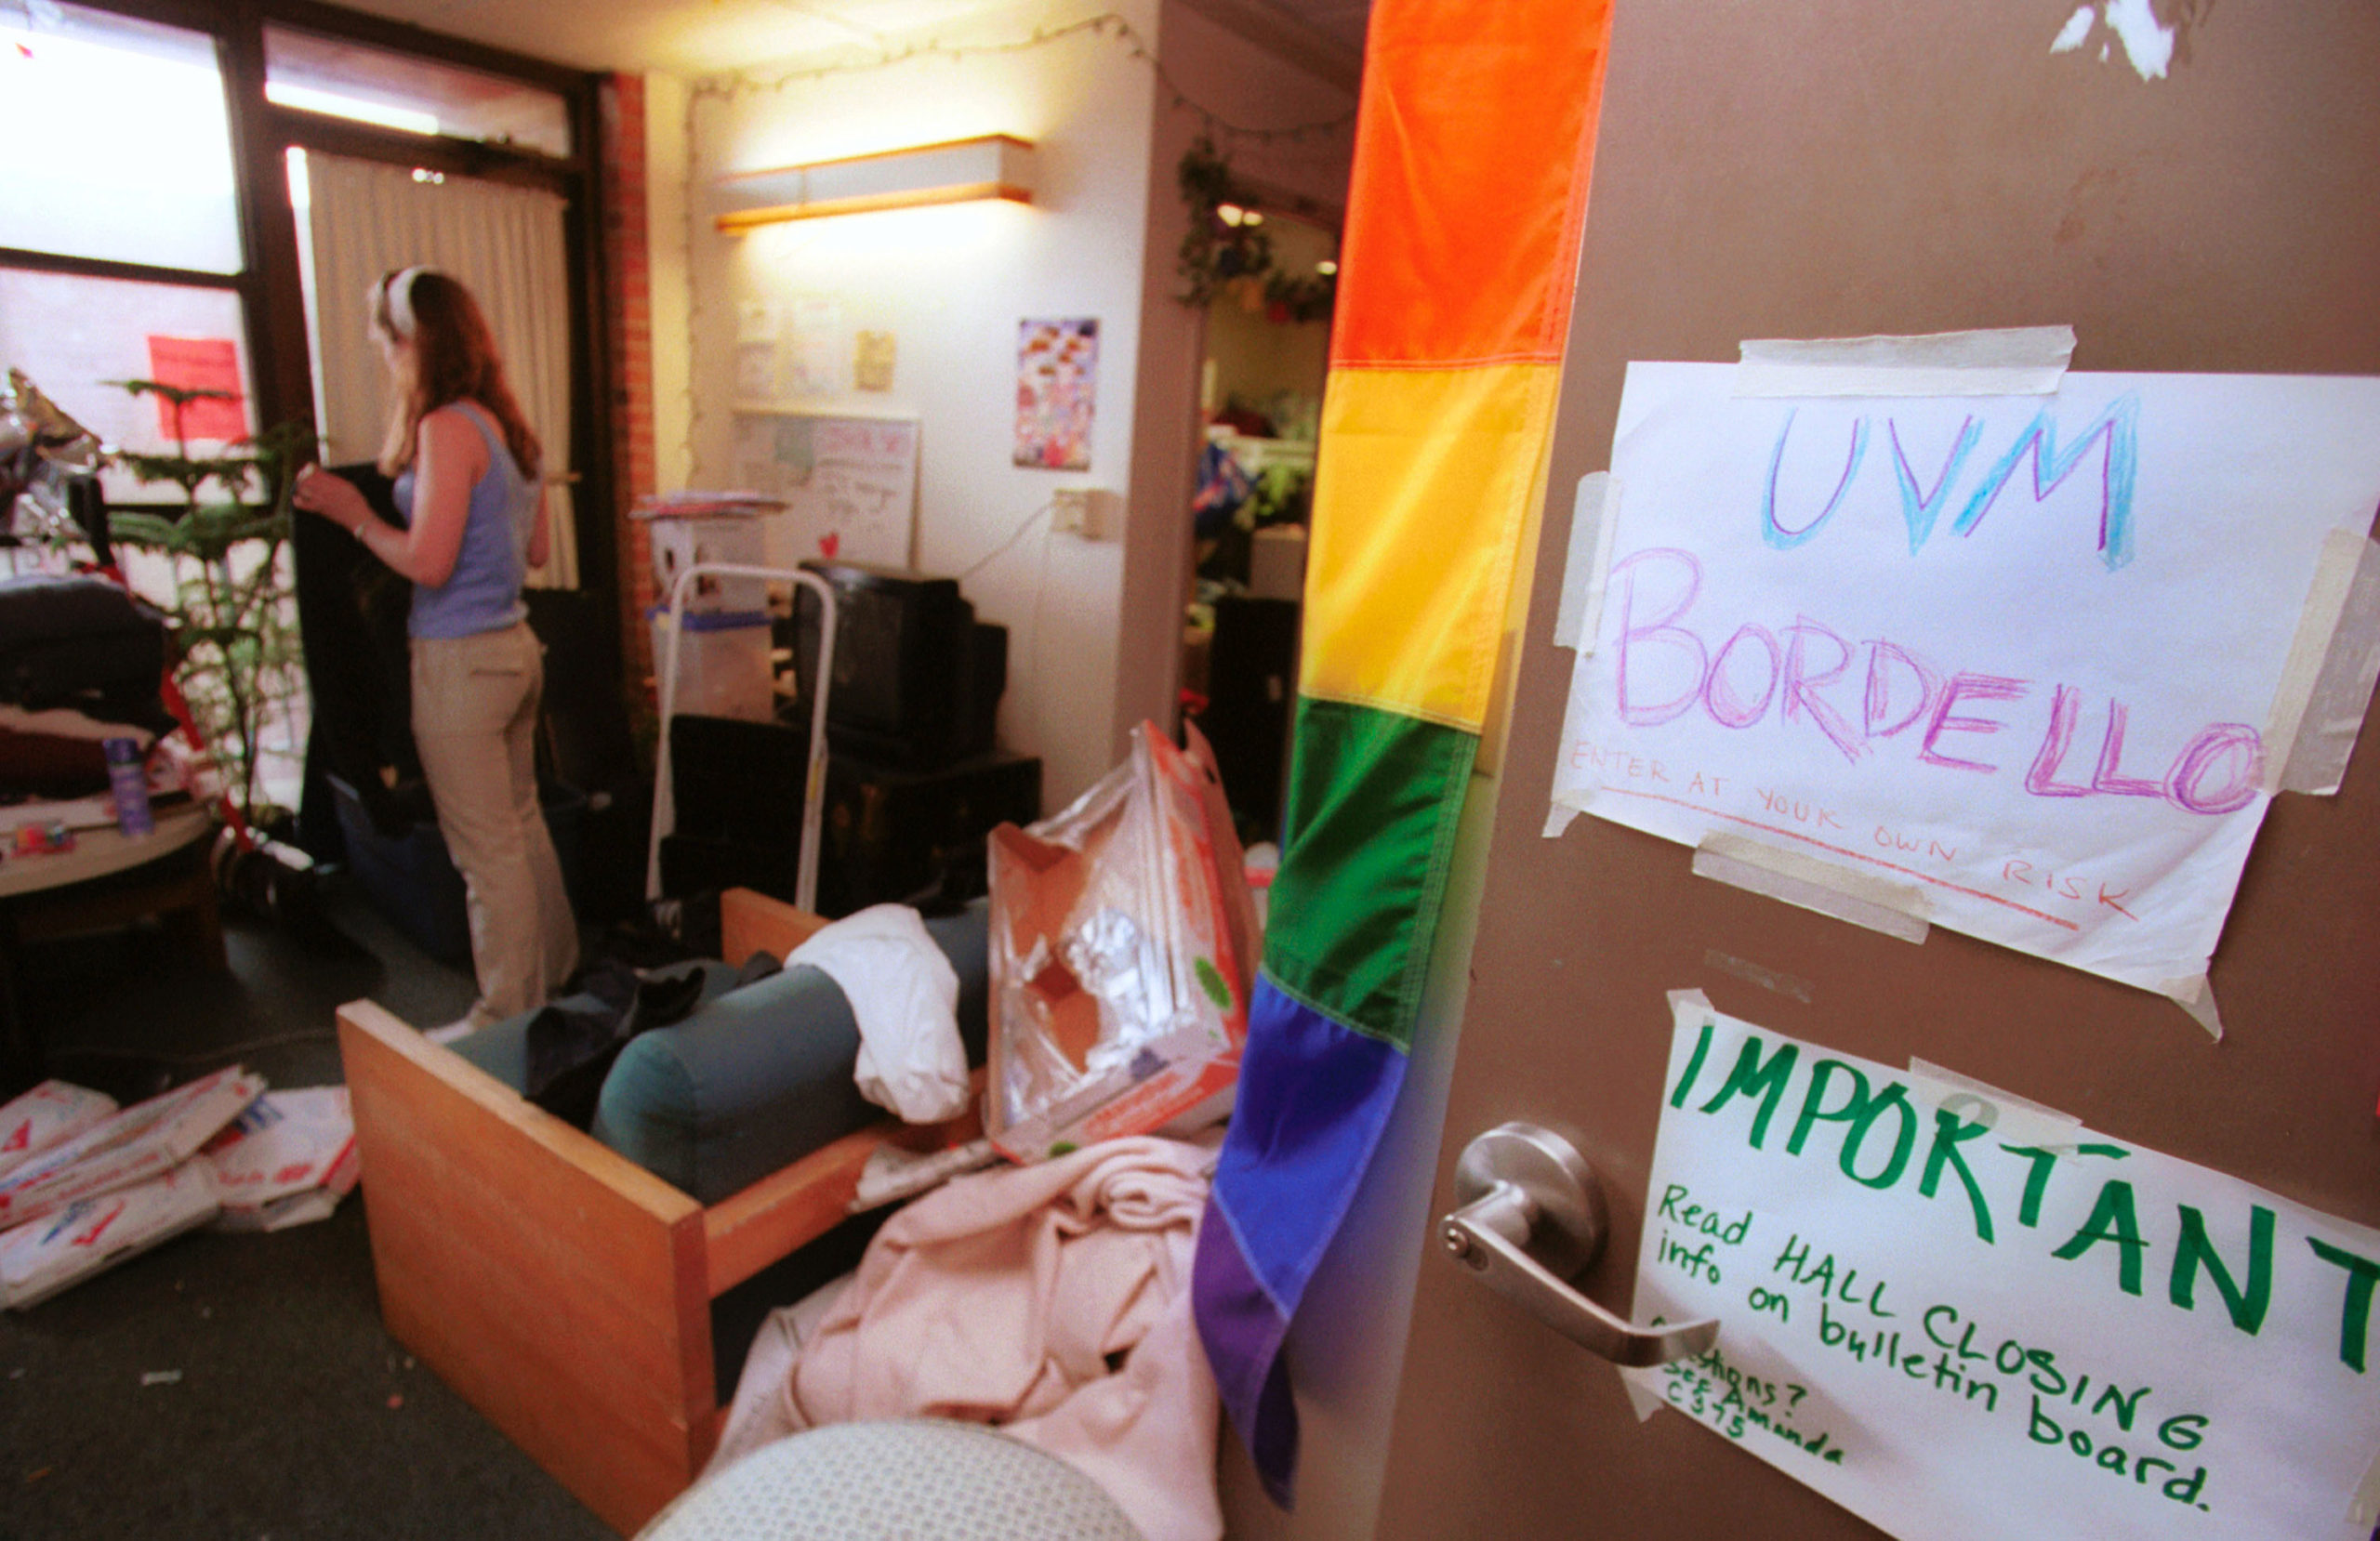 An unidentified student packs up her belongings for the end of the semester in a suite called "A room of our own" at the University of Vermont (UVM) May 7, 2002 in Burlington, VT. The suite-style dorm was the first gay friendly housing offered at UVM. New housing, including 10 double rooms on an entire dormitory floor, will be reserved for Lesbian, Gay, Bi-sexual, Transgender, Questioning, Allied (LGBTQA) students. The general purpose of the two housing options is to provide students with living quarters where they can feel free from judgment or harassment. Other schools offering similar housing options include the University of Massachusetts, Wesleyan University and the University of Maine. (Photo by Jordan Silverman/Getty Images)